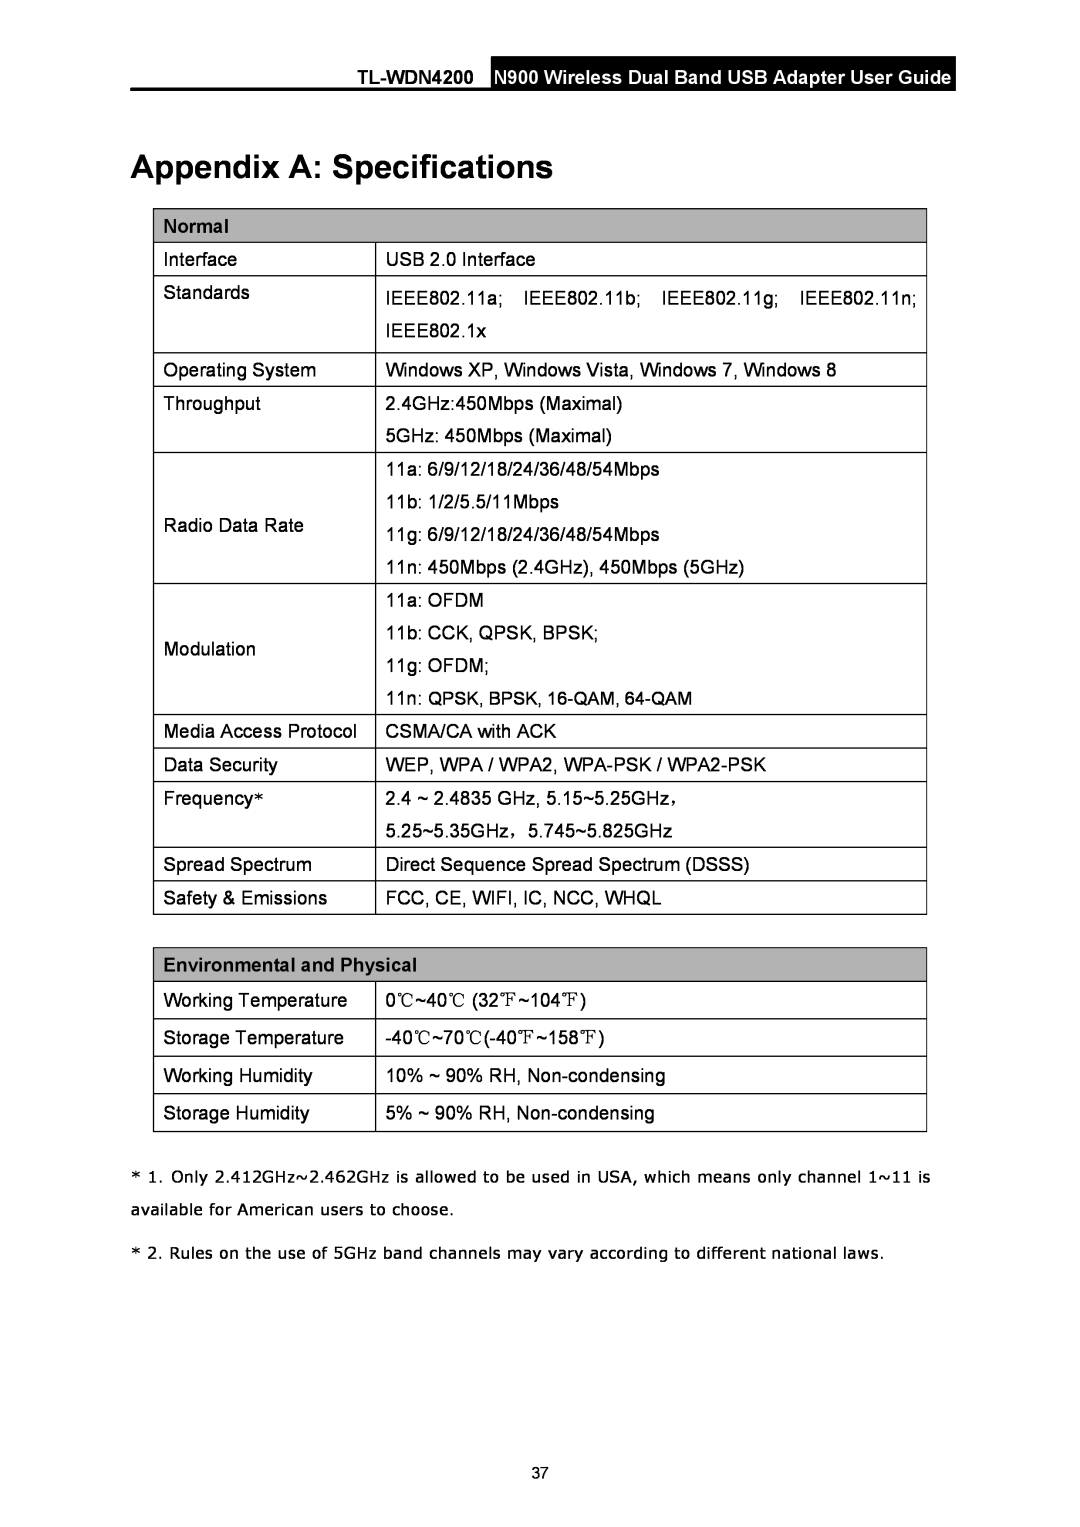 TP-Link TL-WDN4200 manual Appendix A Specifications, Normal, Environmental and Physical 